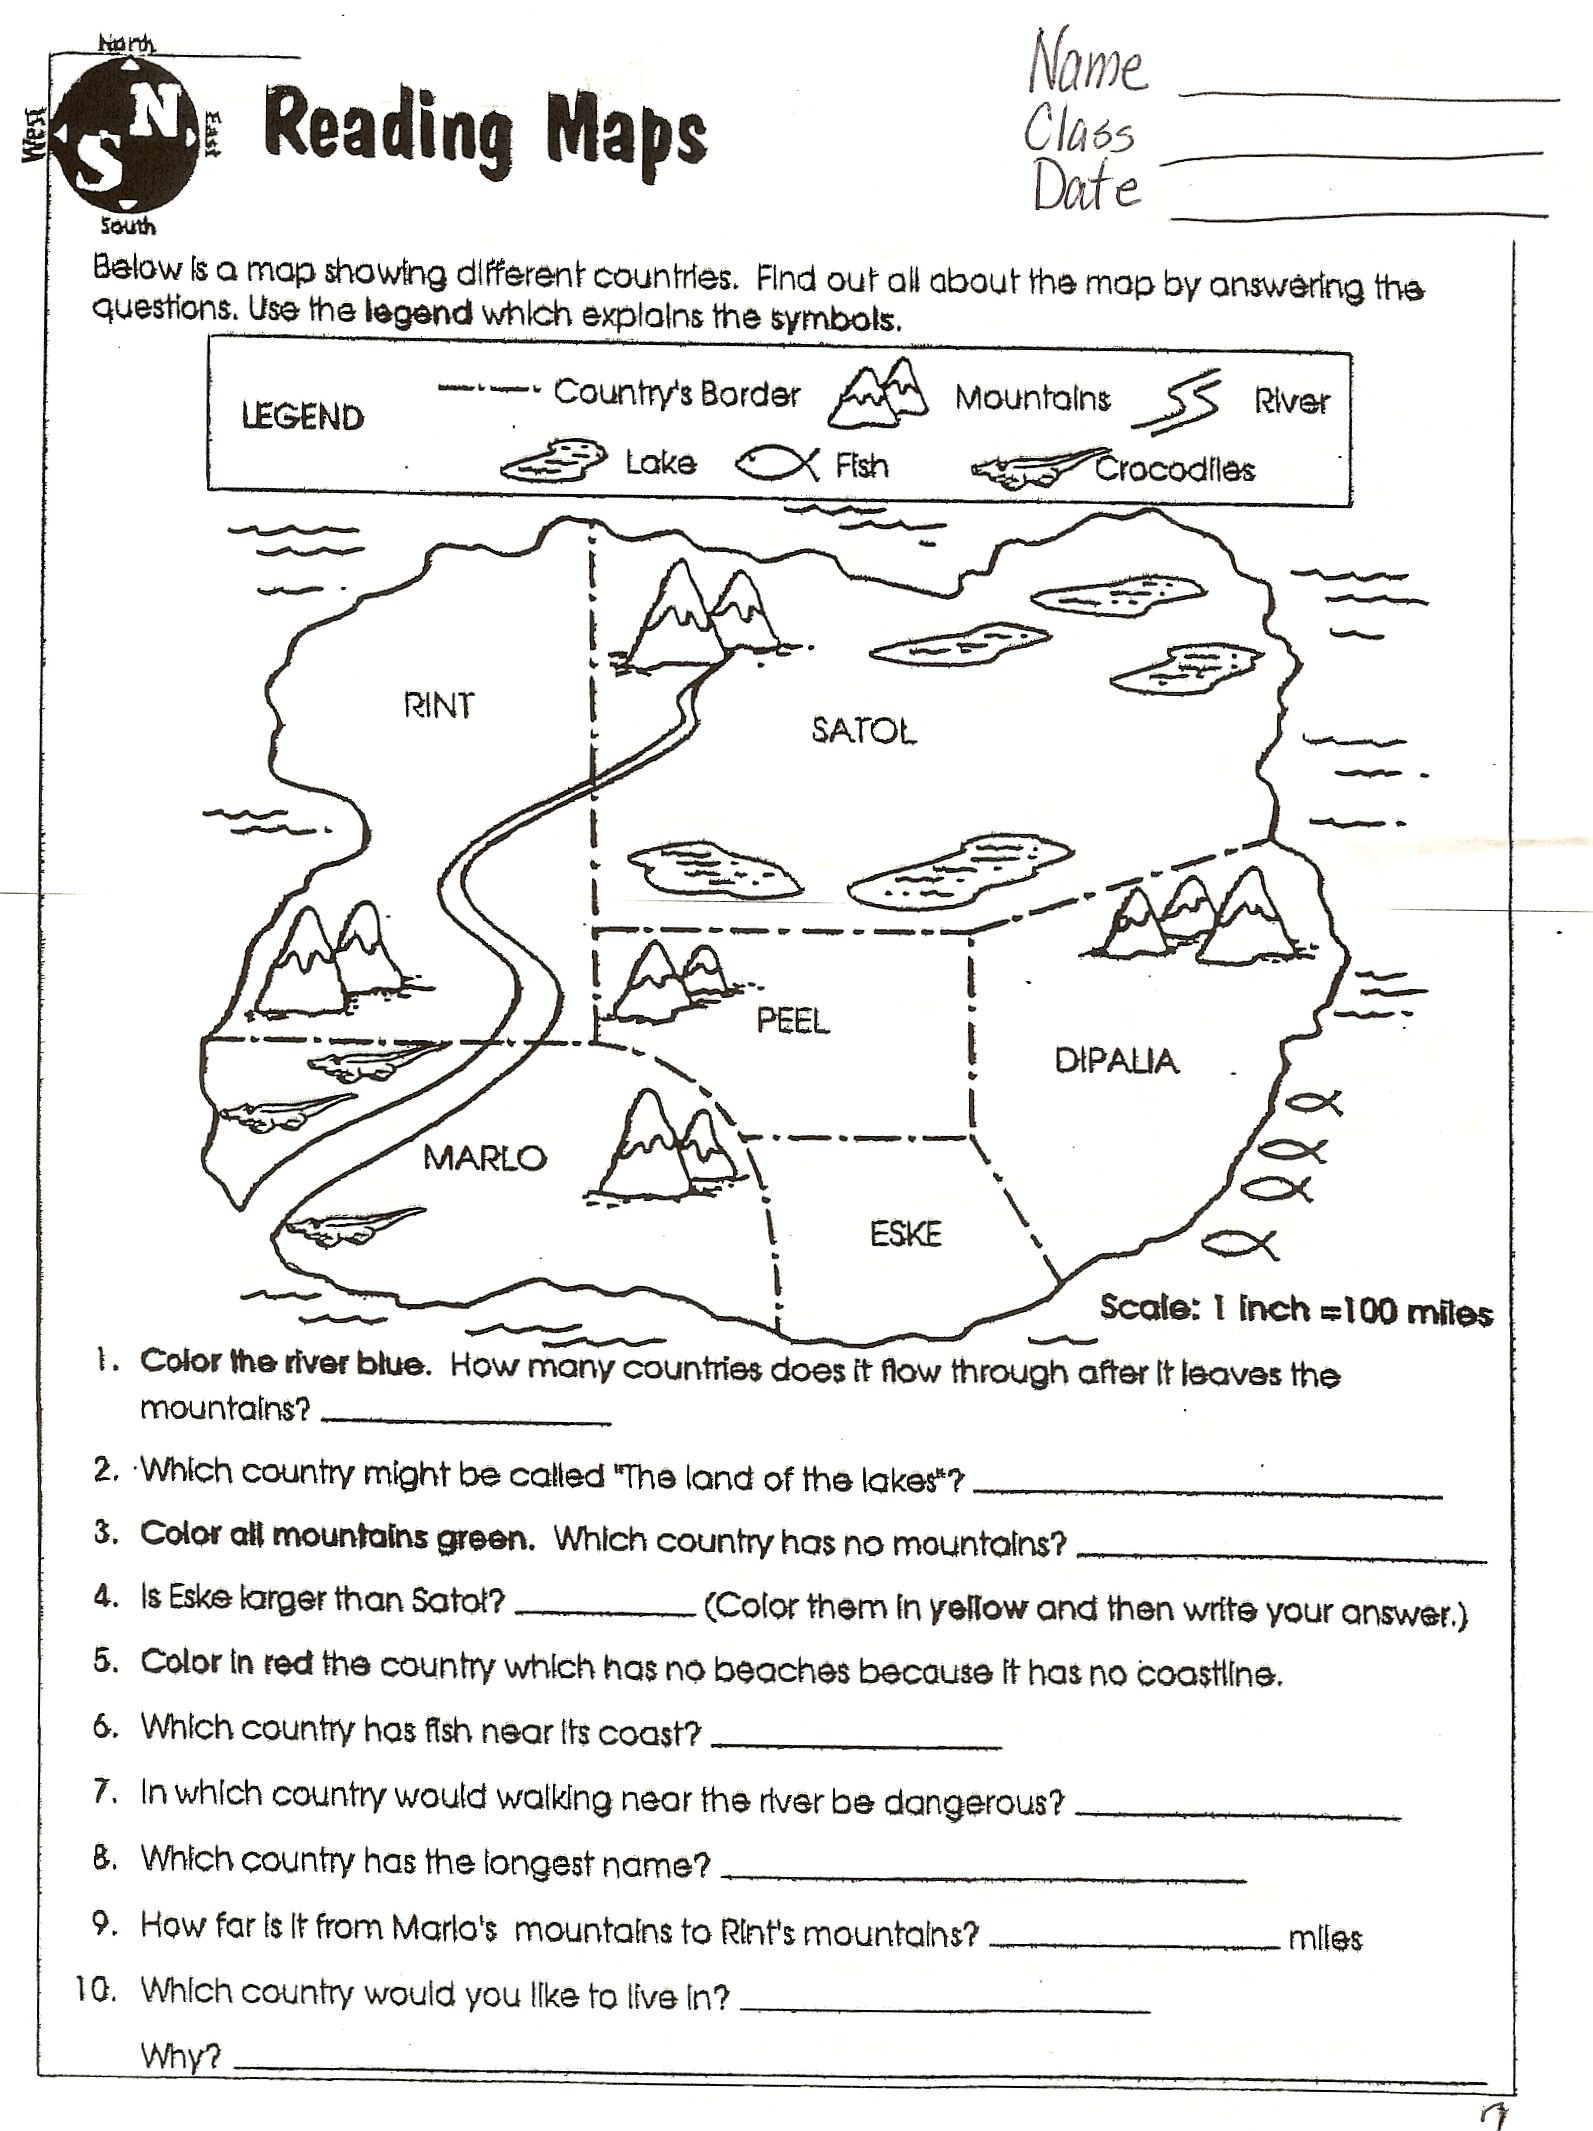 Topographic Map Reading Worksheet Agrawala 24agrawal On Pinterest